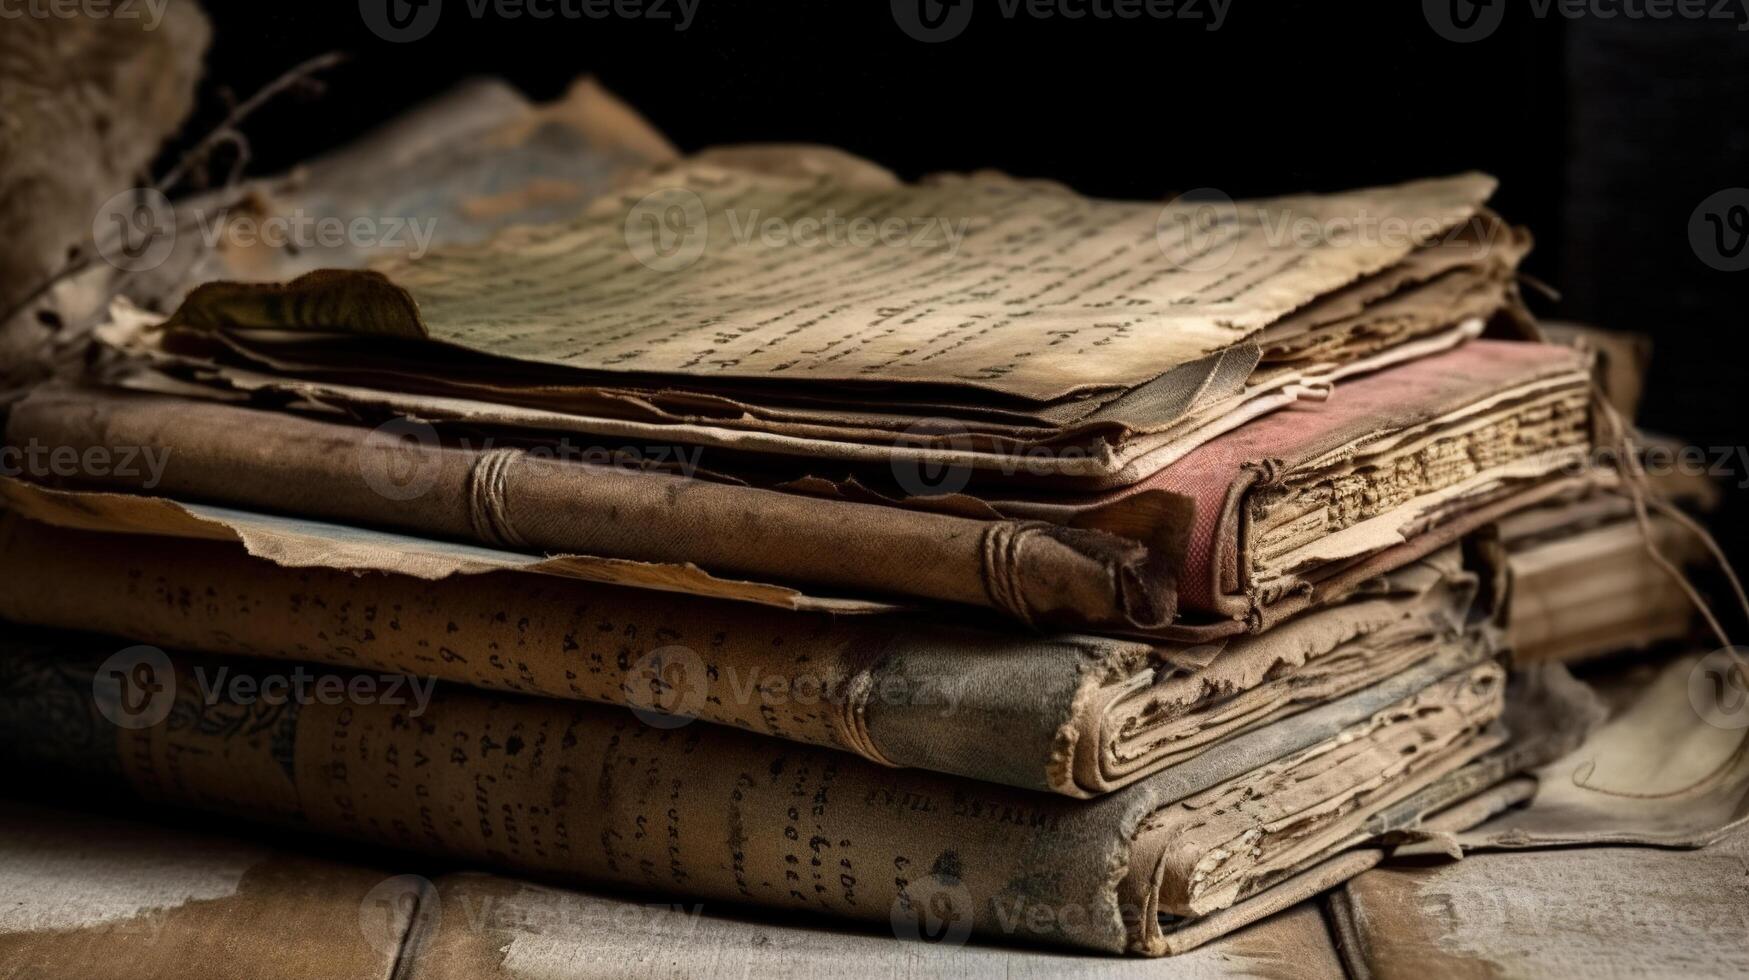 Old, damaged books or history scrolls written in the Middle Ages or earlier. photo